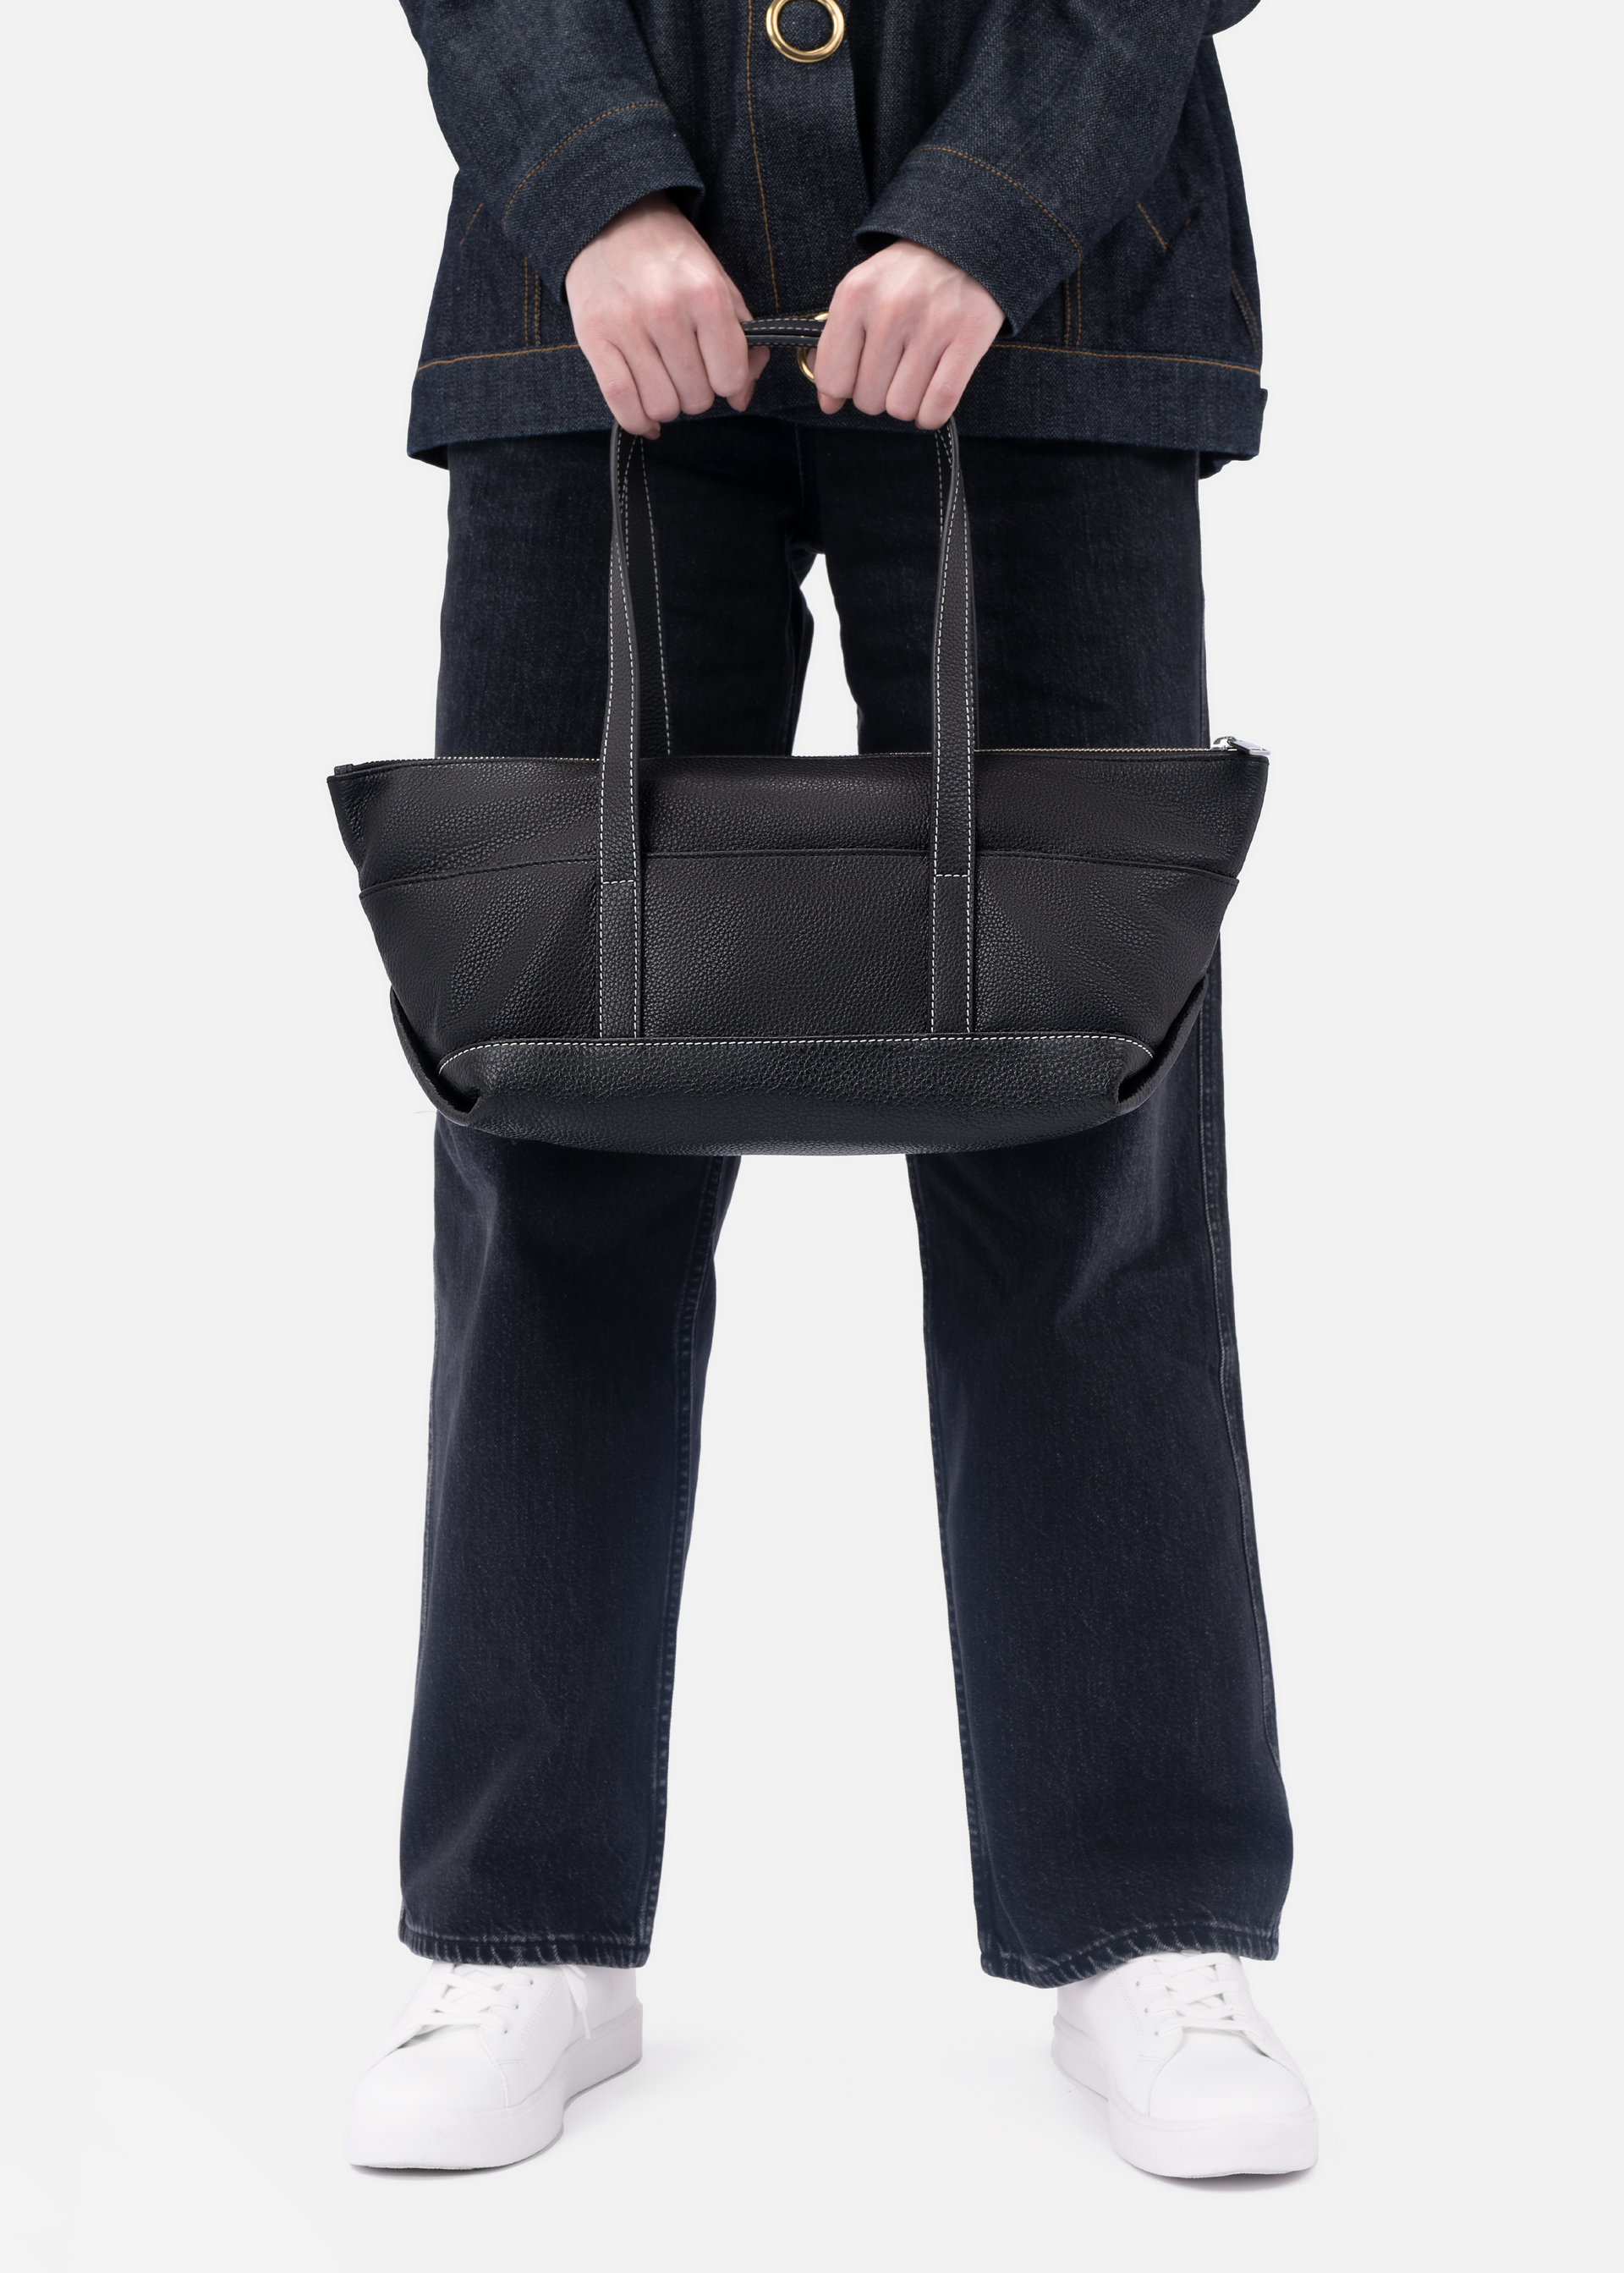 Maria pebble leather shoulder bag in black with white stitching